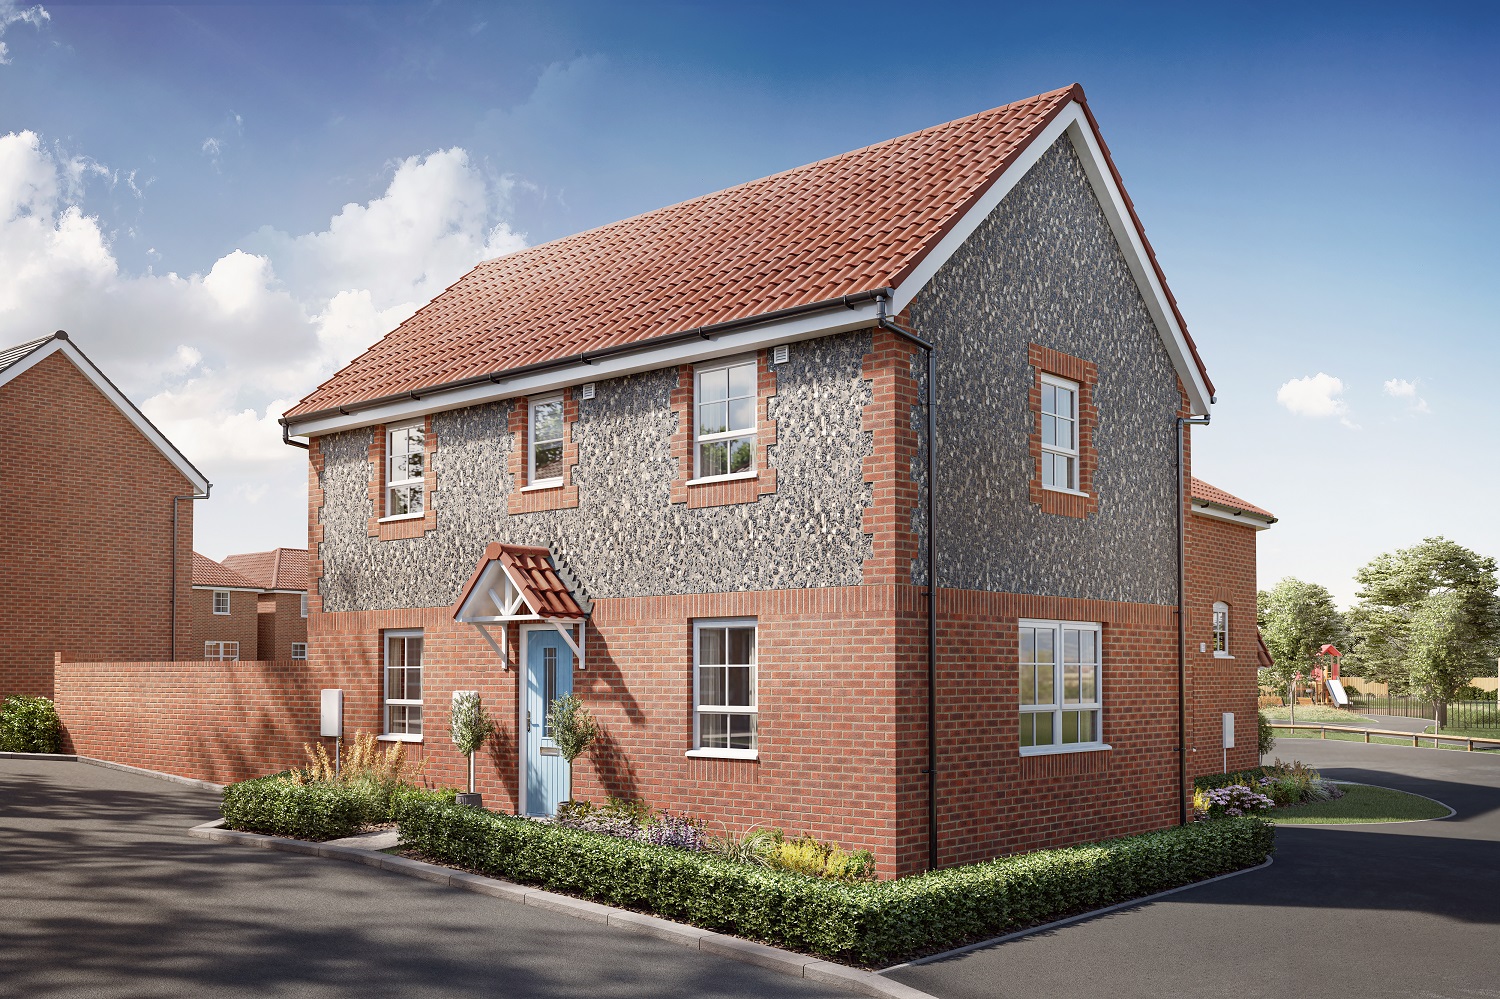 Property 1 of 7. CGI - External Front View Of The Martham